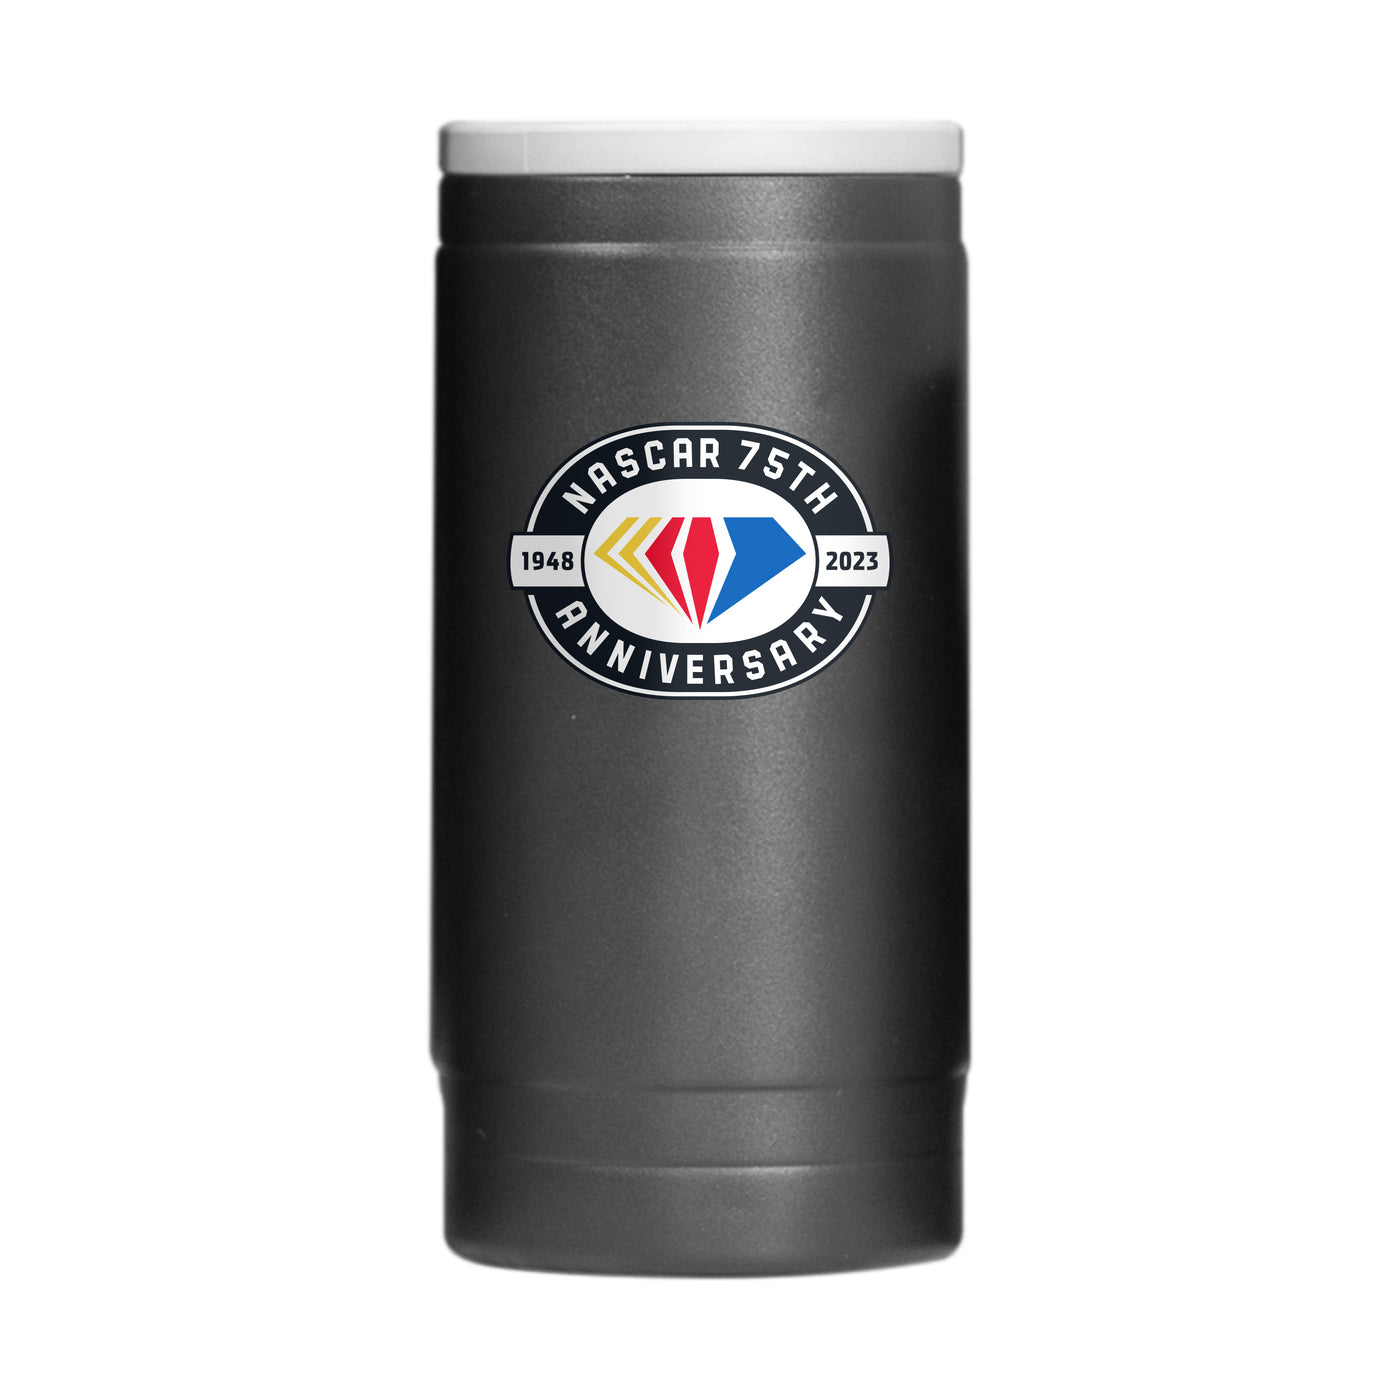 NASCAR 75th Anniversary 12 oz Can Cooler